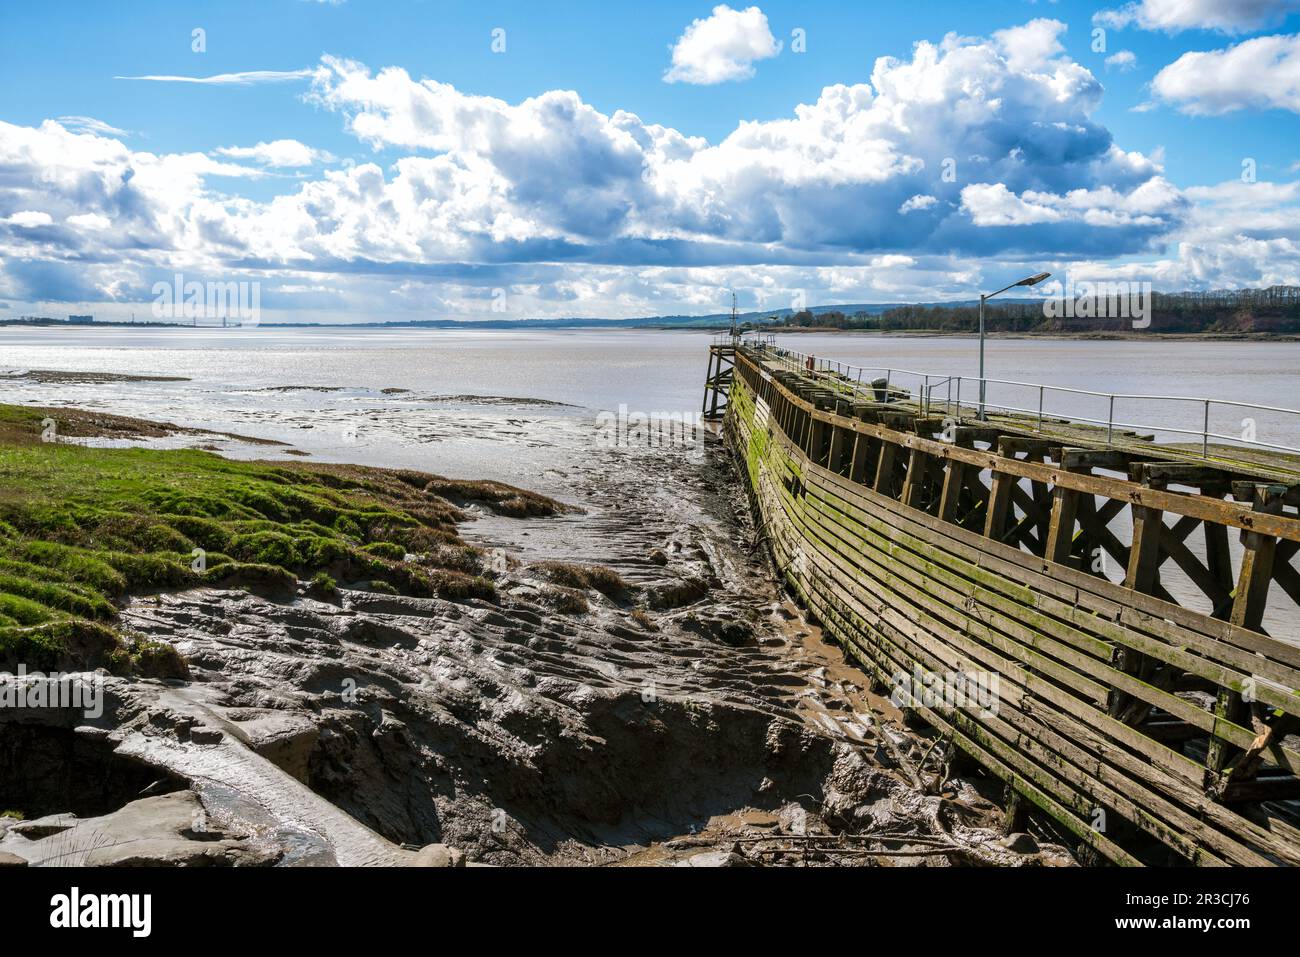 View of the Severn Estuary as viewed from the entrance to Sharpness Docks, Gloucestershire, United Kingdom Stock Photo